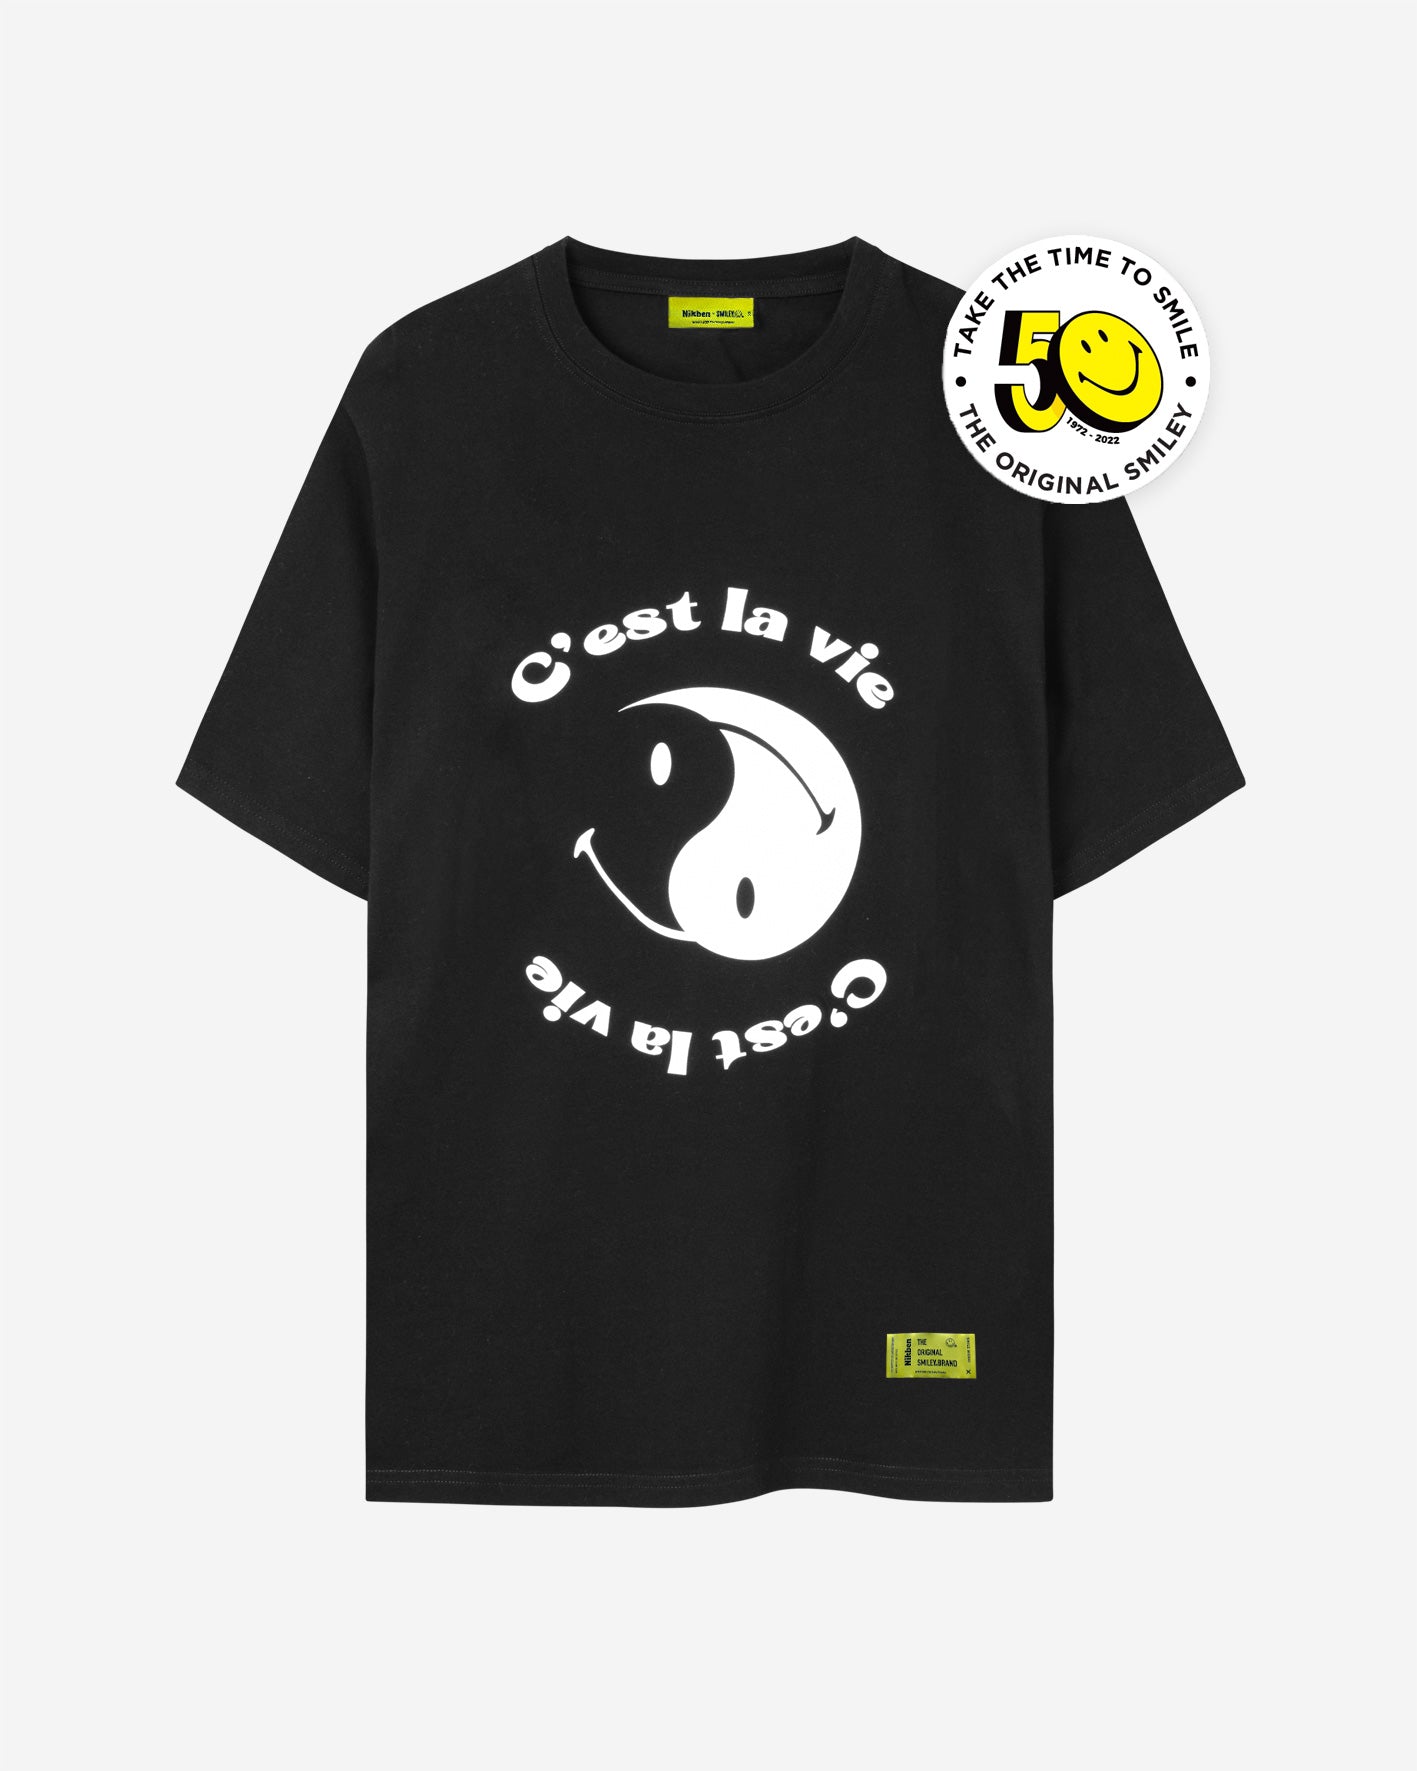 Black t-shirt with white smiley print and text